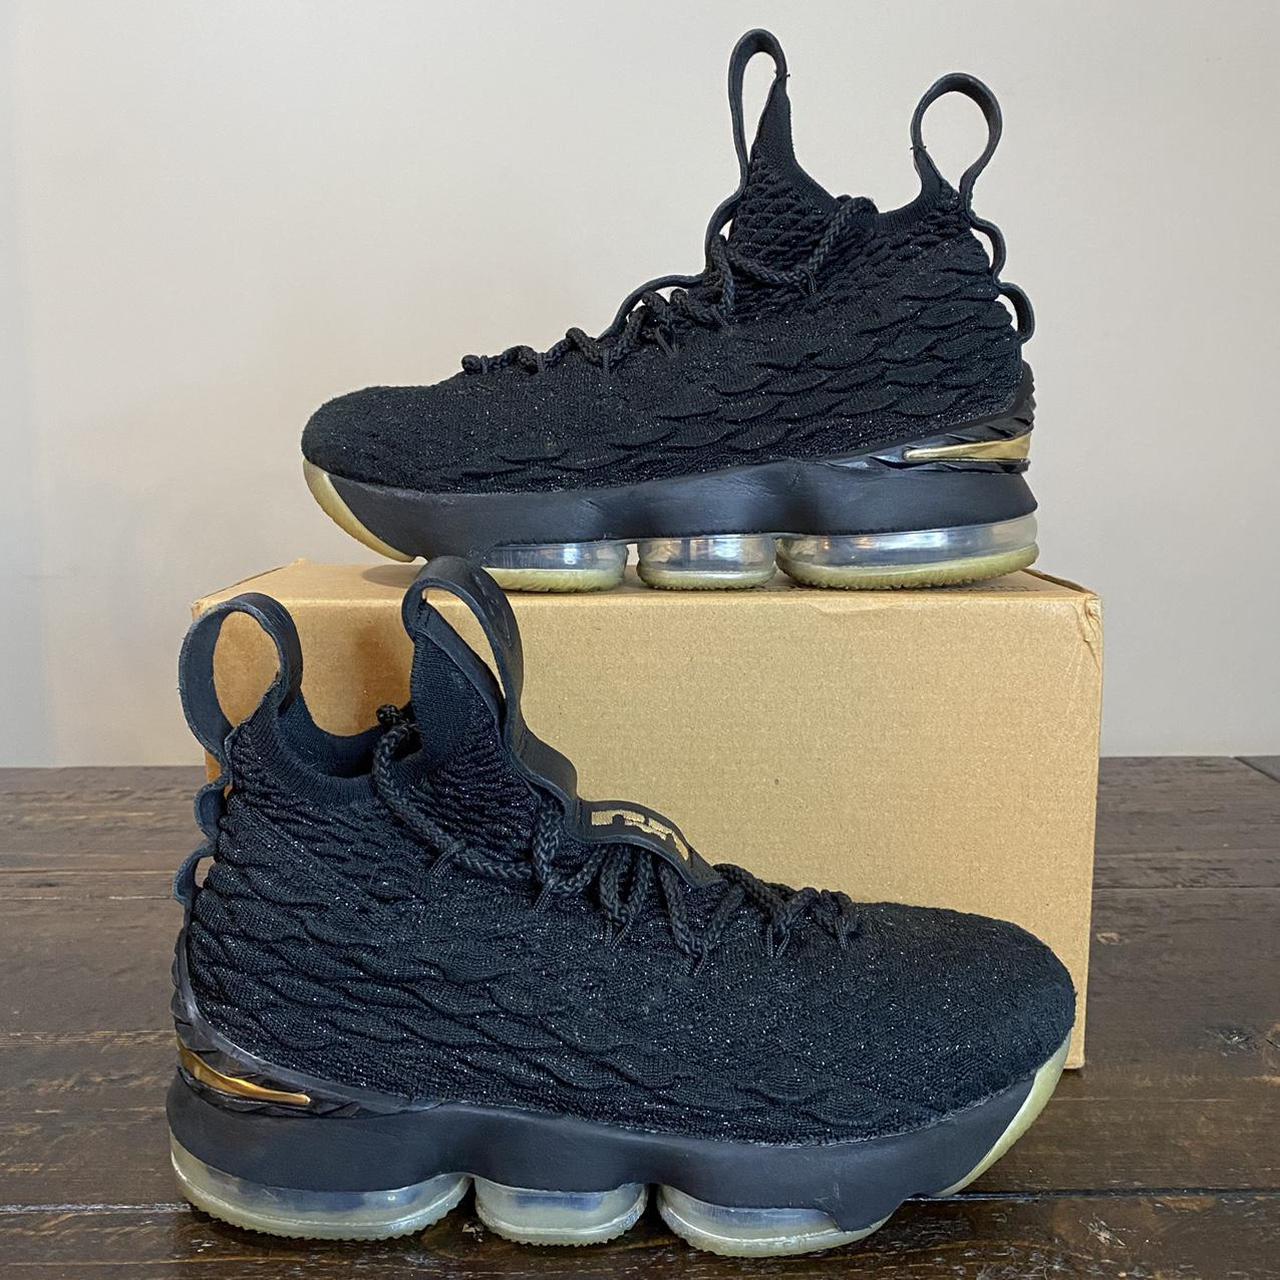 lebron 15 black and gold size 13